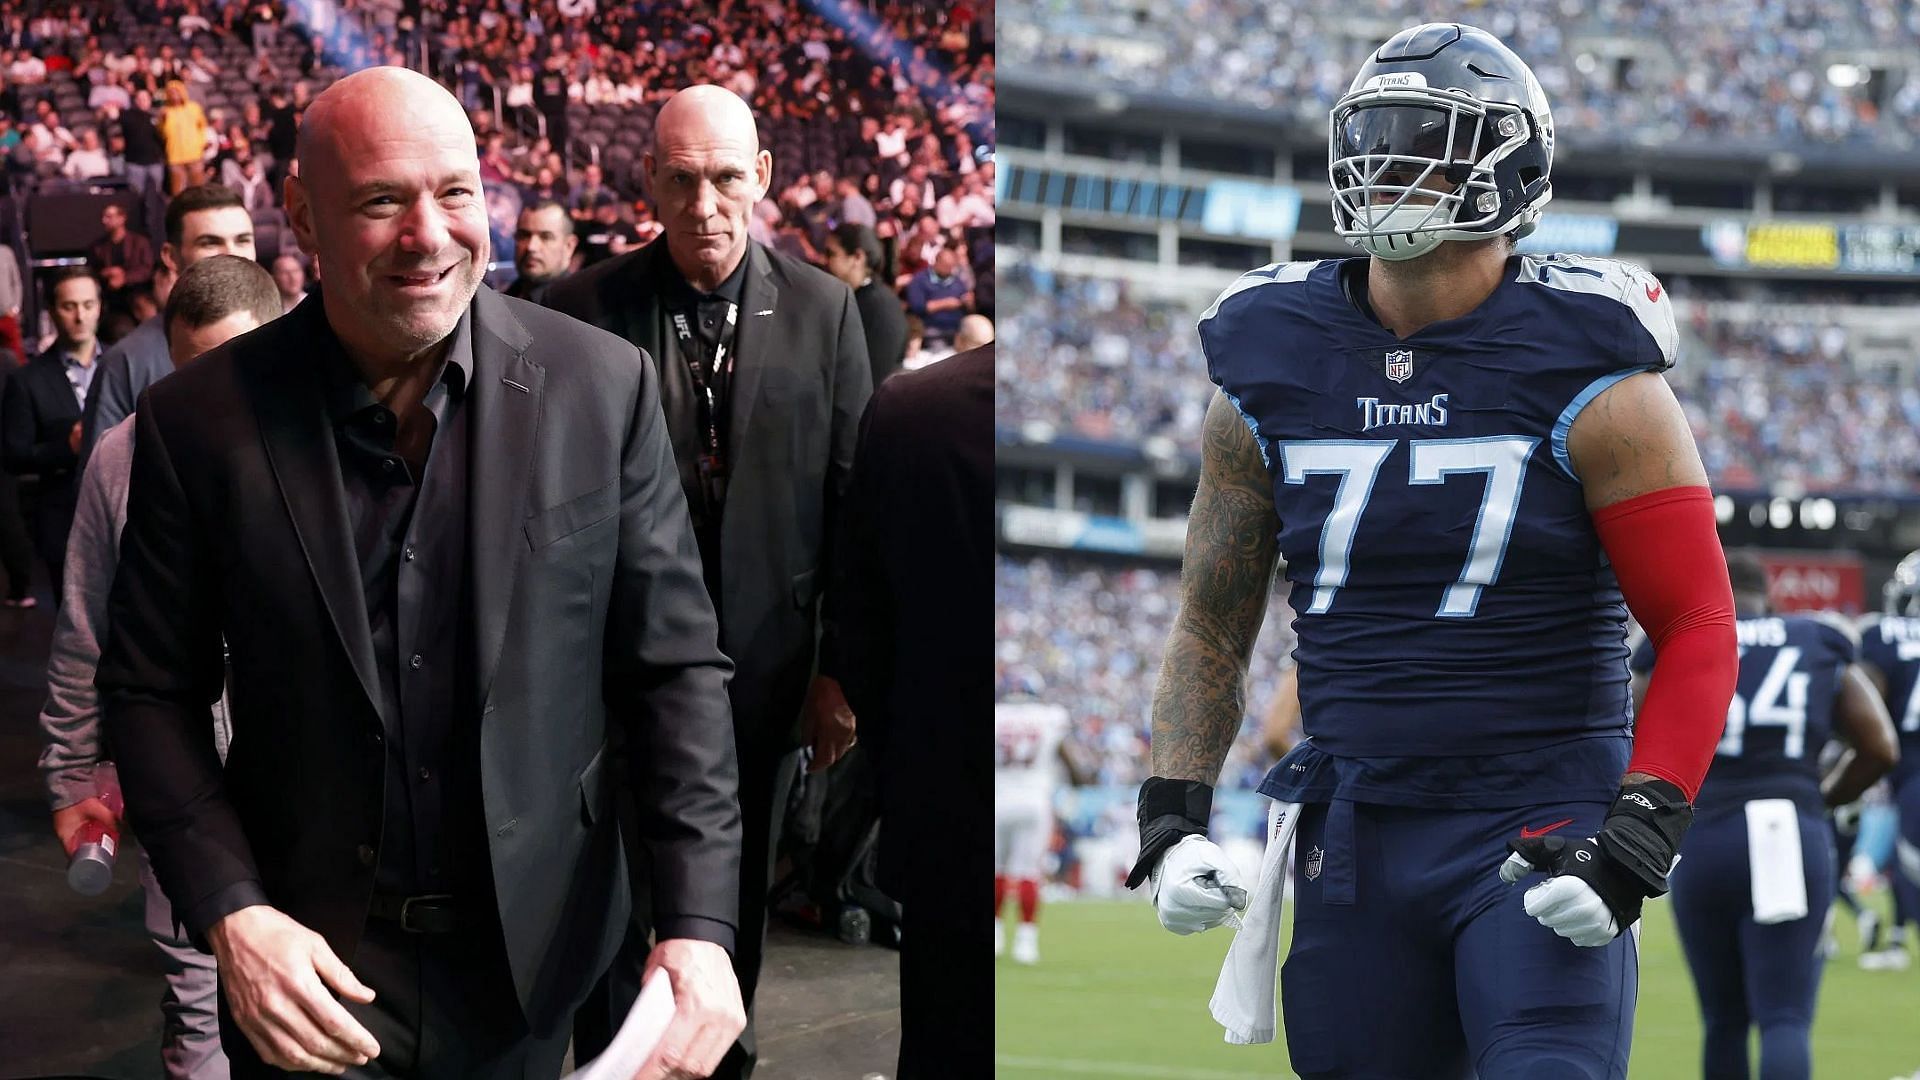 White has detailed a funny story about former NFL player Taylor Lewan.